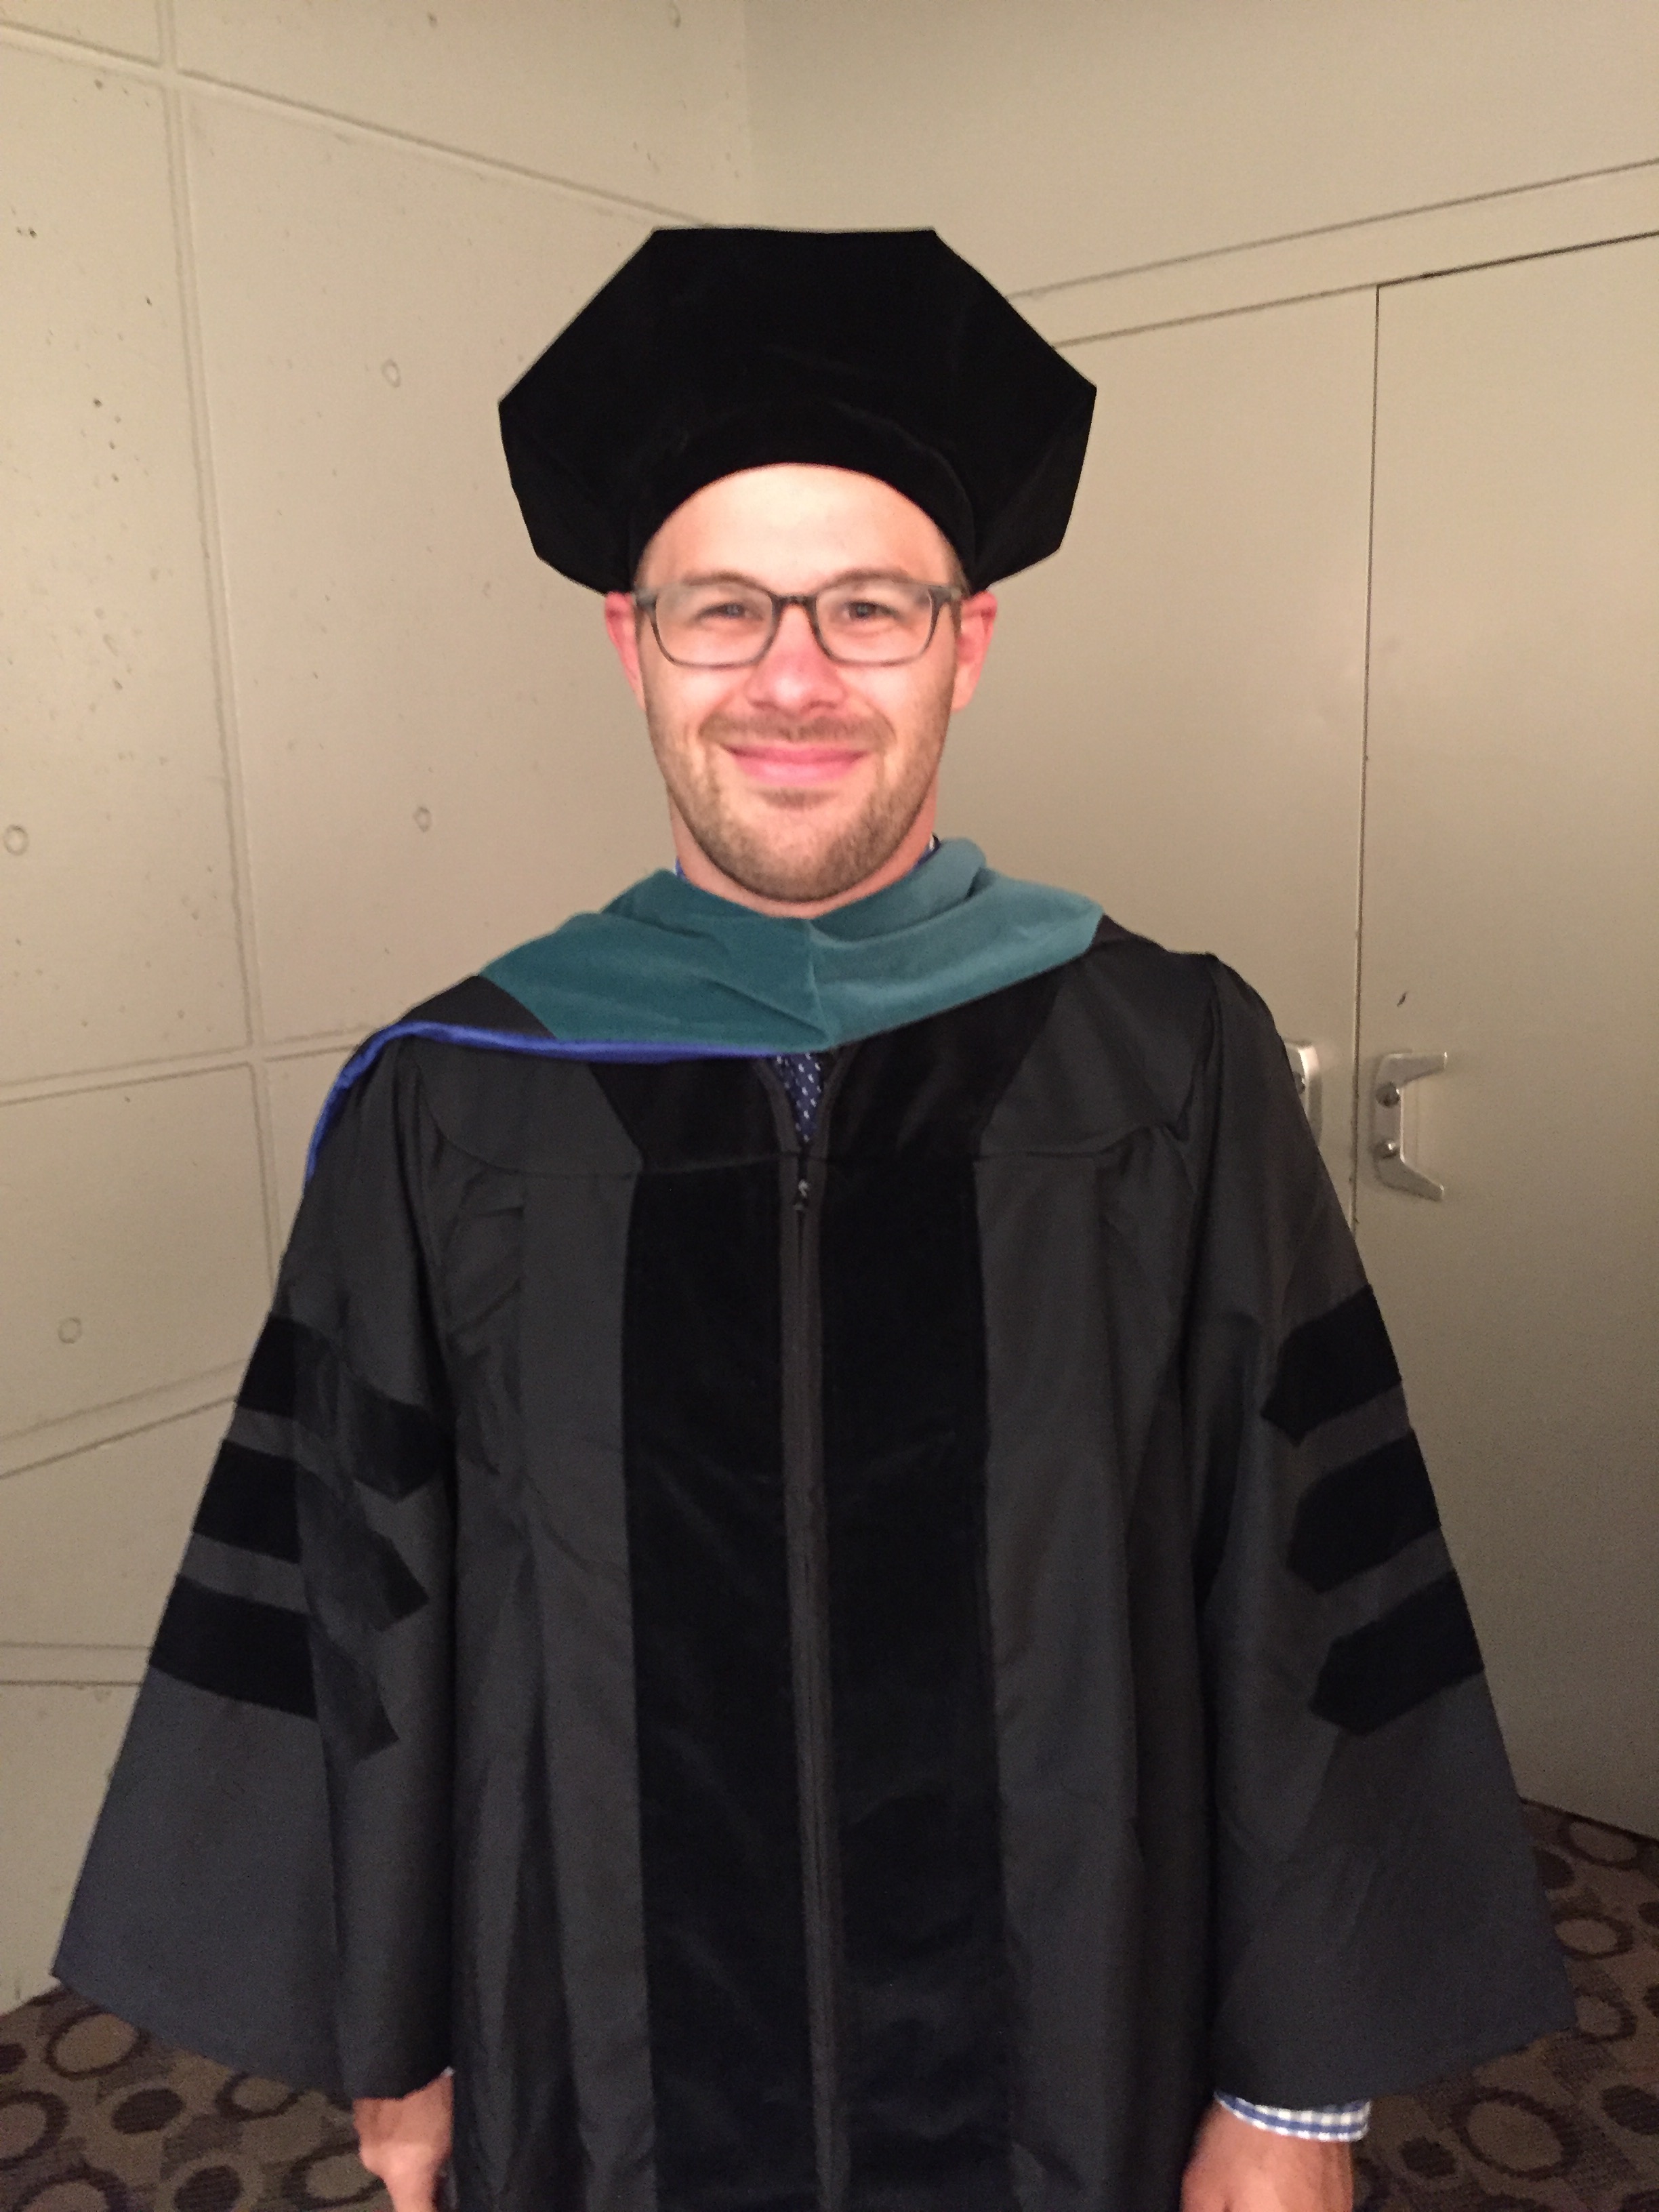 Luke Hudson, class of 2016, graduate of the School of Health Sciences Doctor of Physical Therapy Program